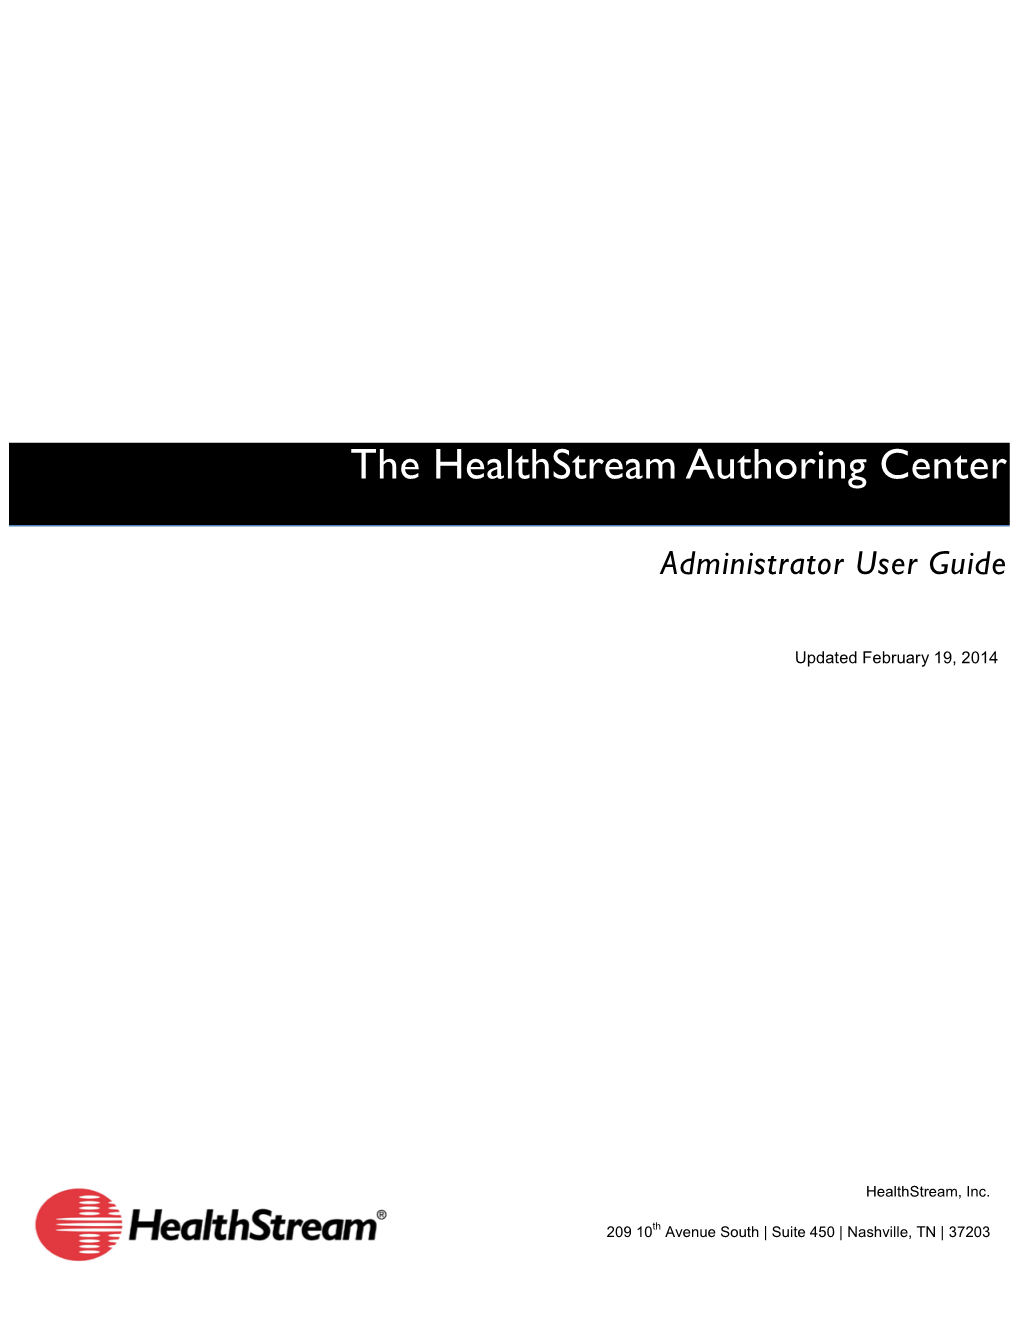 The Healthstream Authoring Center